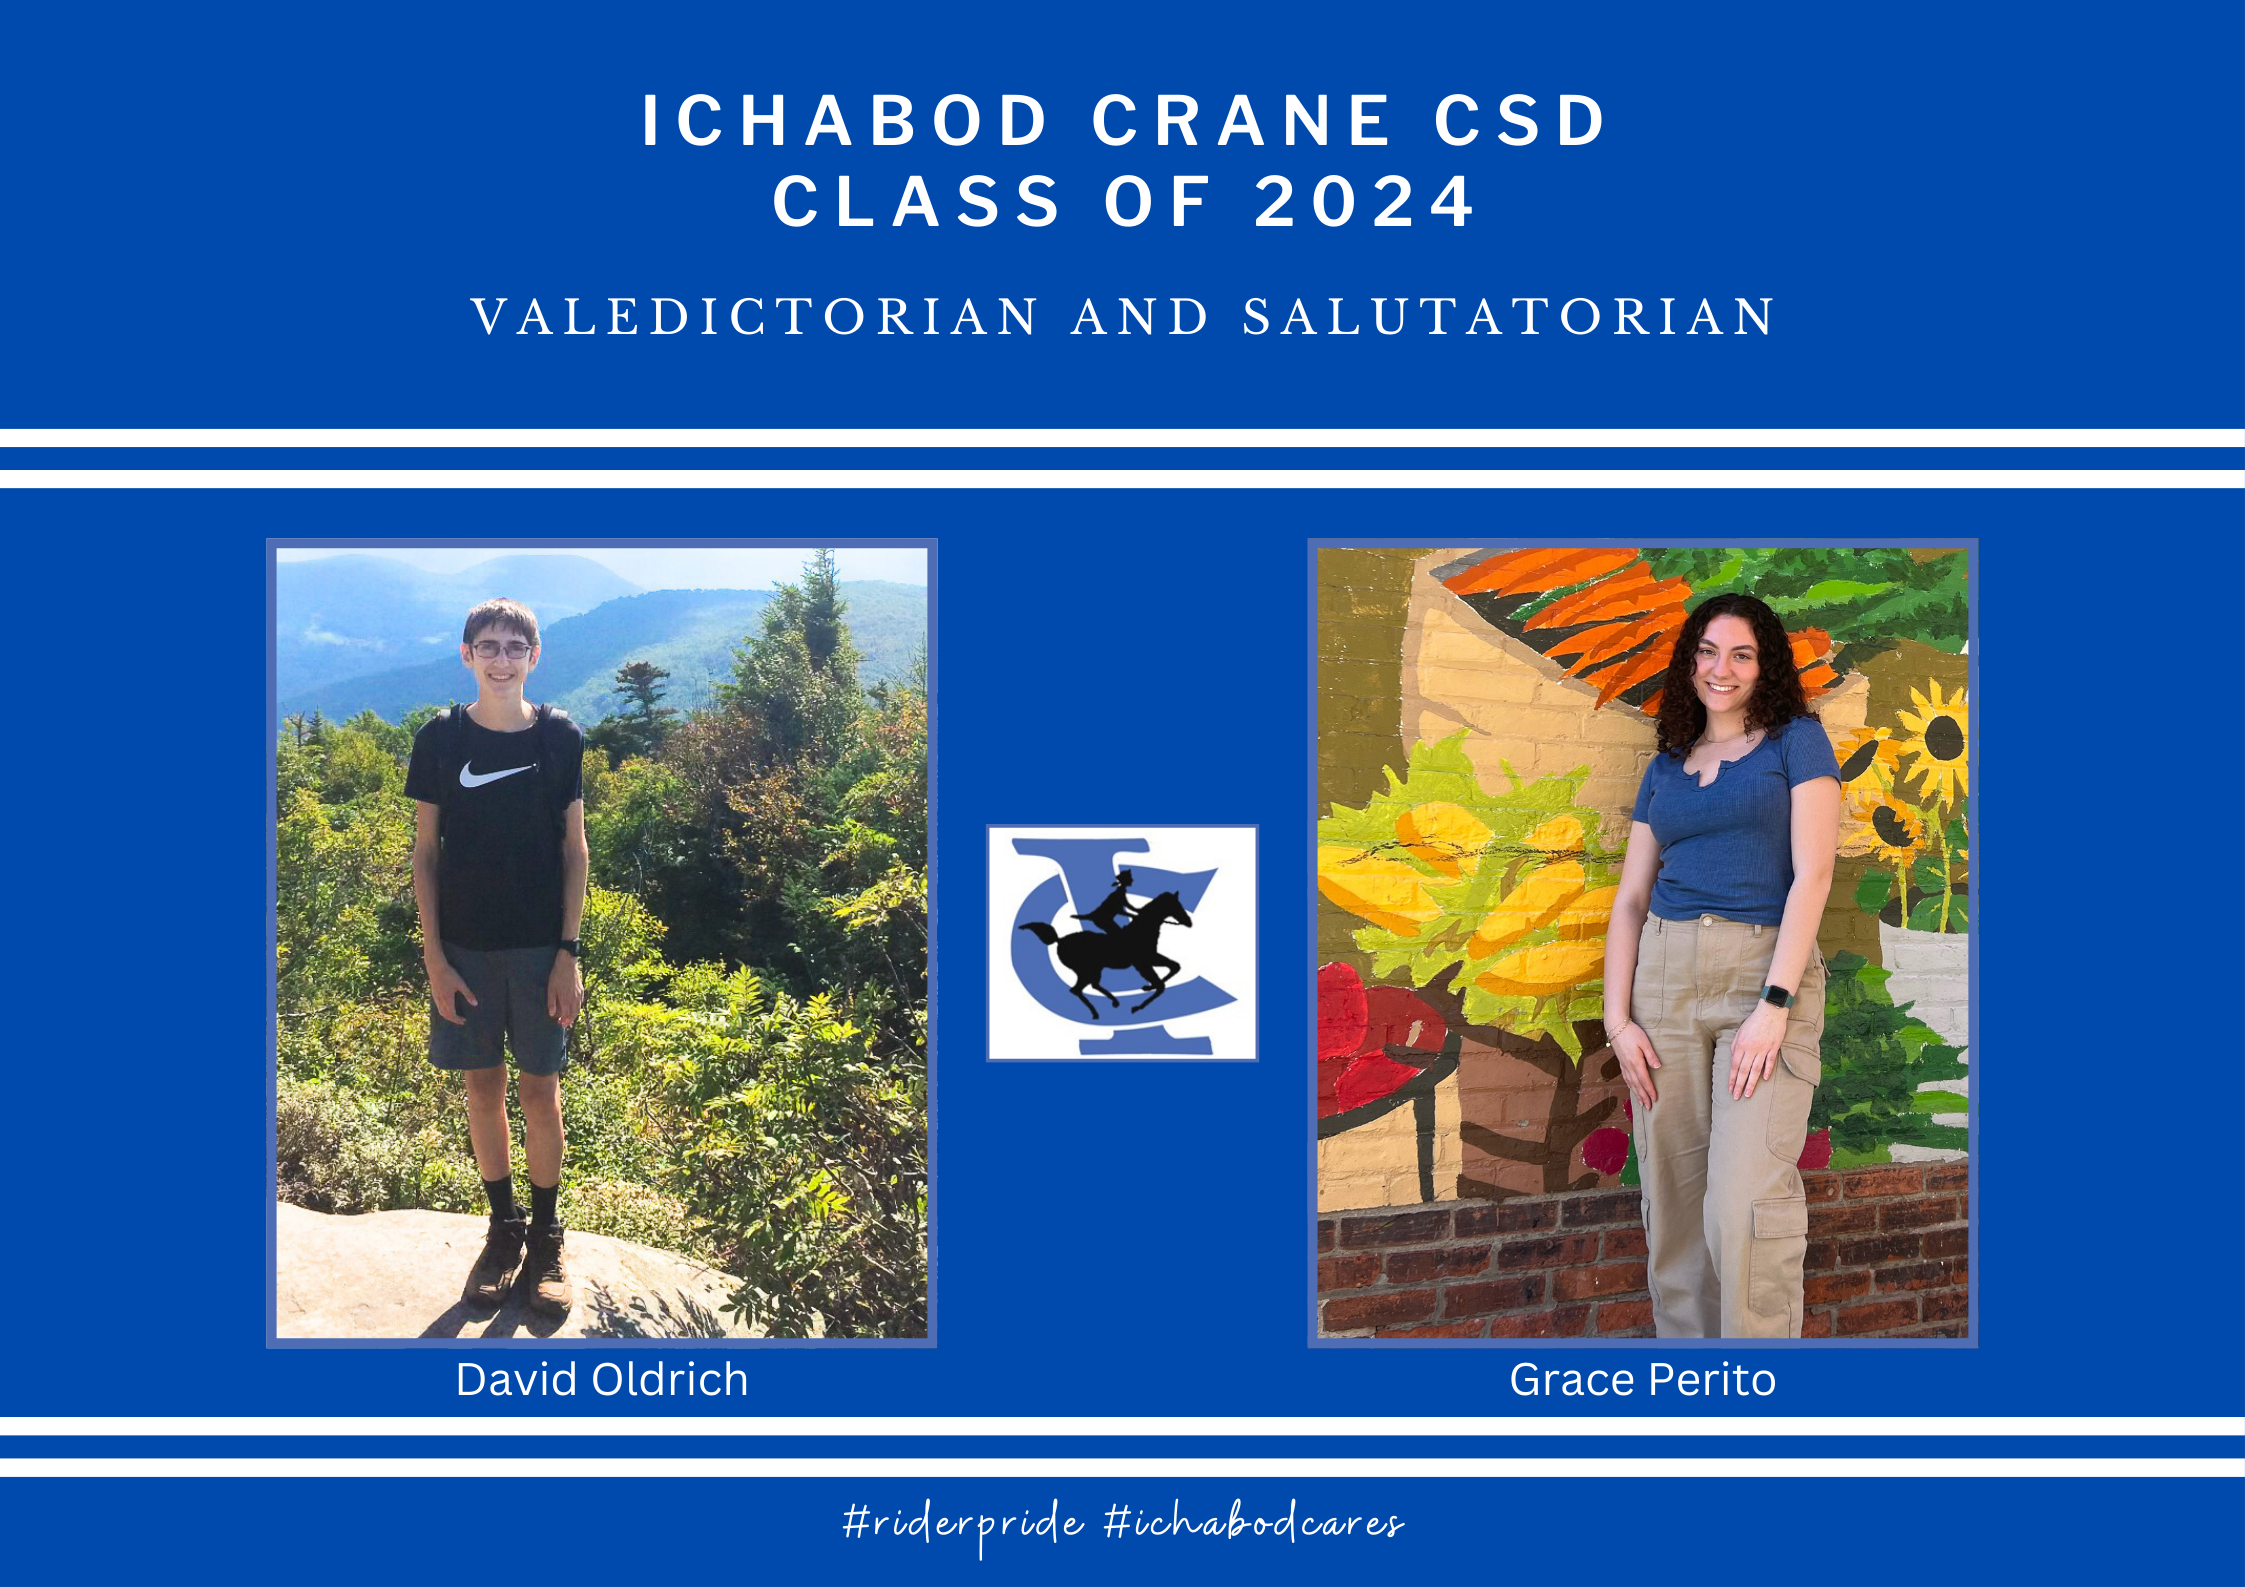 Graphic displaying the Class of 2024 Valedictorian, David Oldrich, and Salutatorian, Grace Perito.